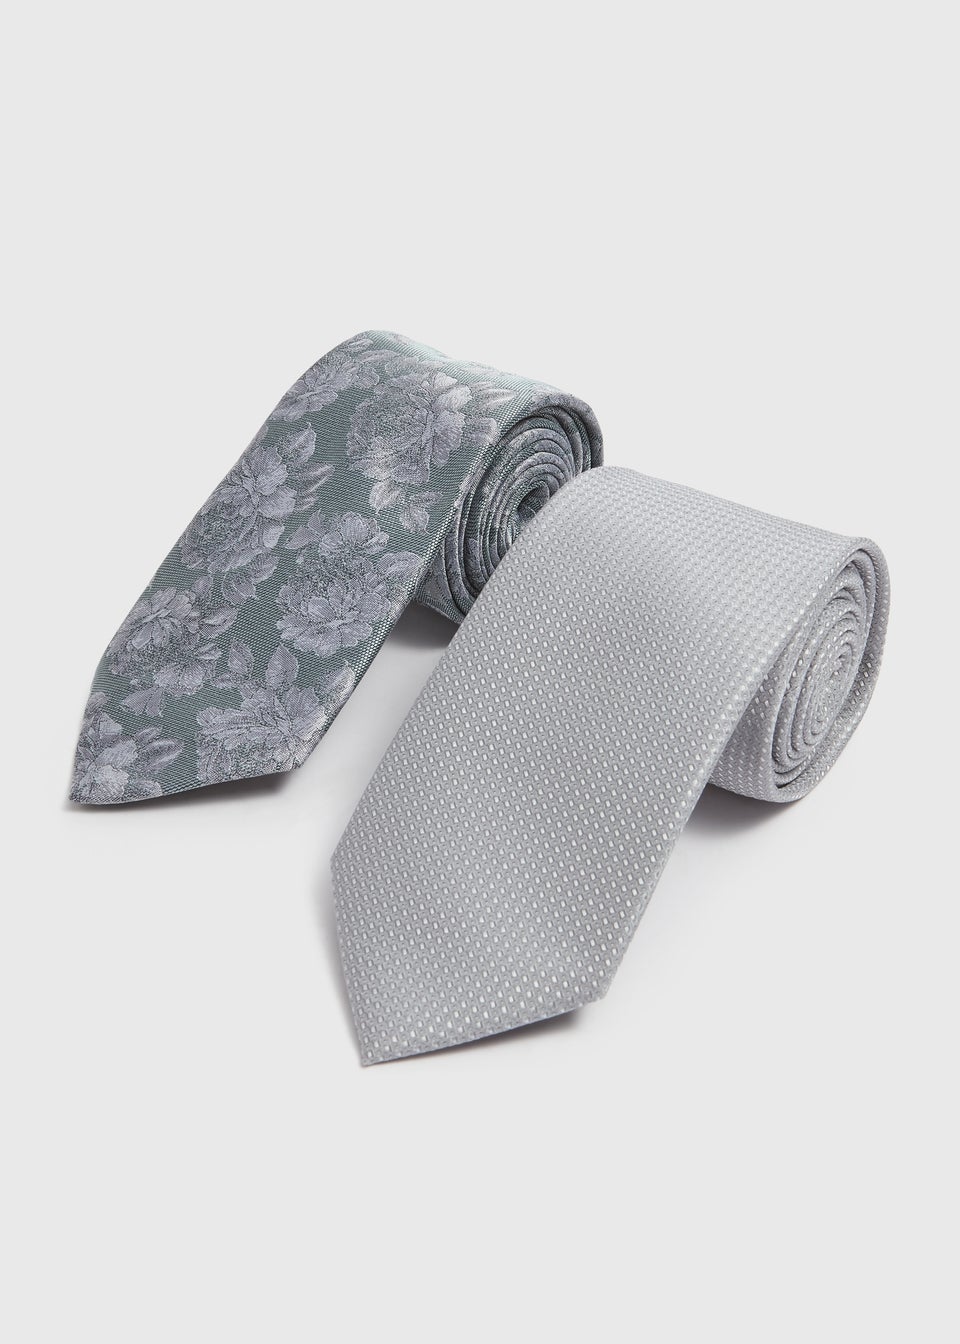 Taylor & Wright 2 Pack Green Floral Ties